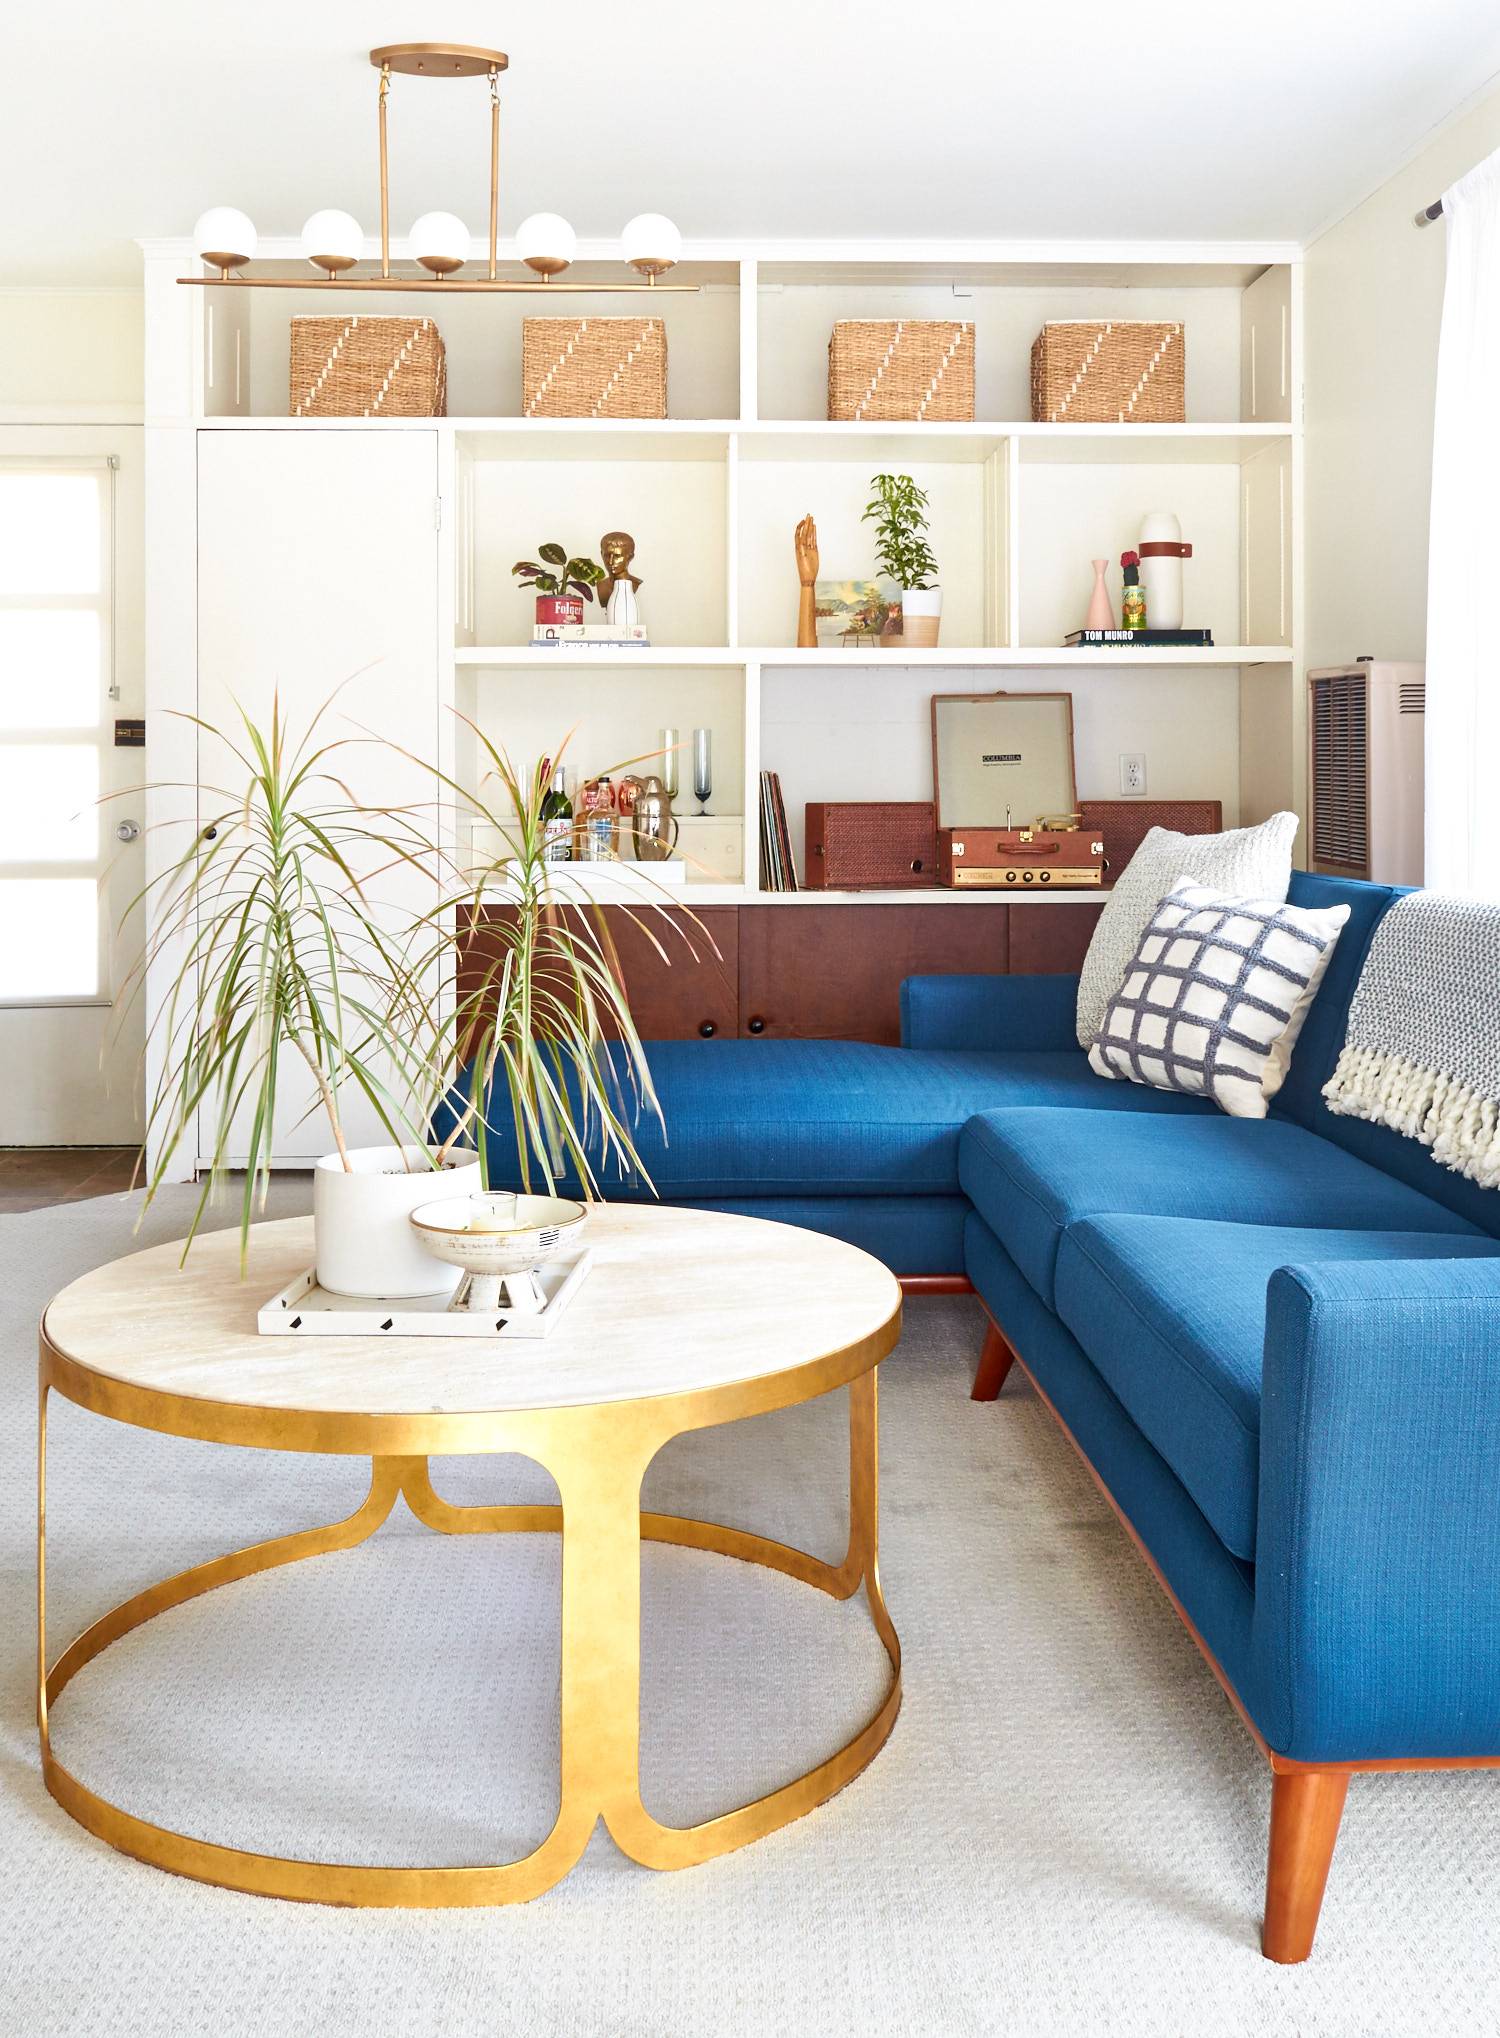 A clean living room with a blue couch, round coffee table and white shelf.